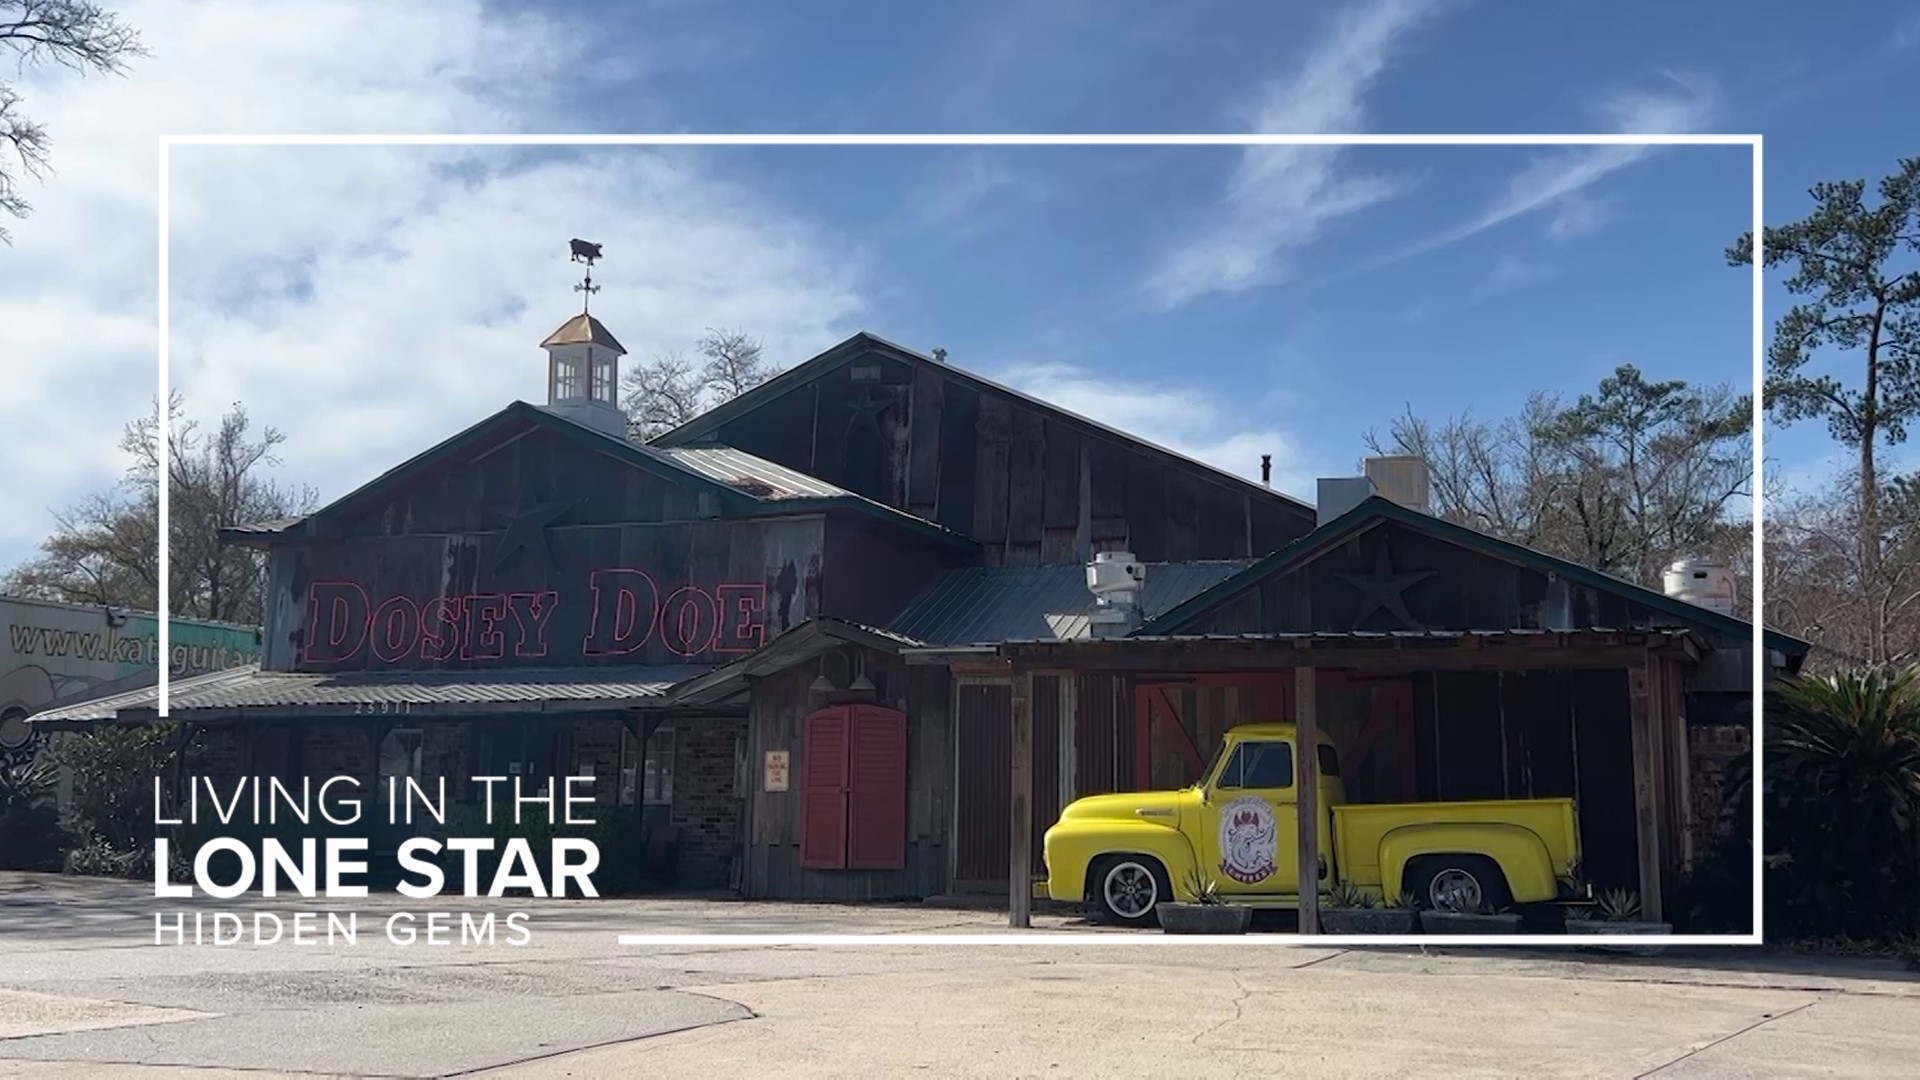 The Dosey Doe Big Barn has hosted everyone from Wynonna Judd to up-and-coming artists, including Parker McCollum.